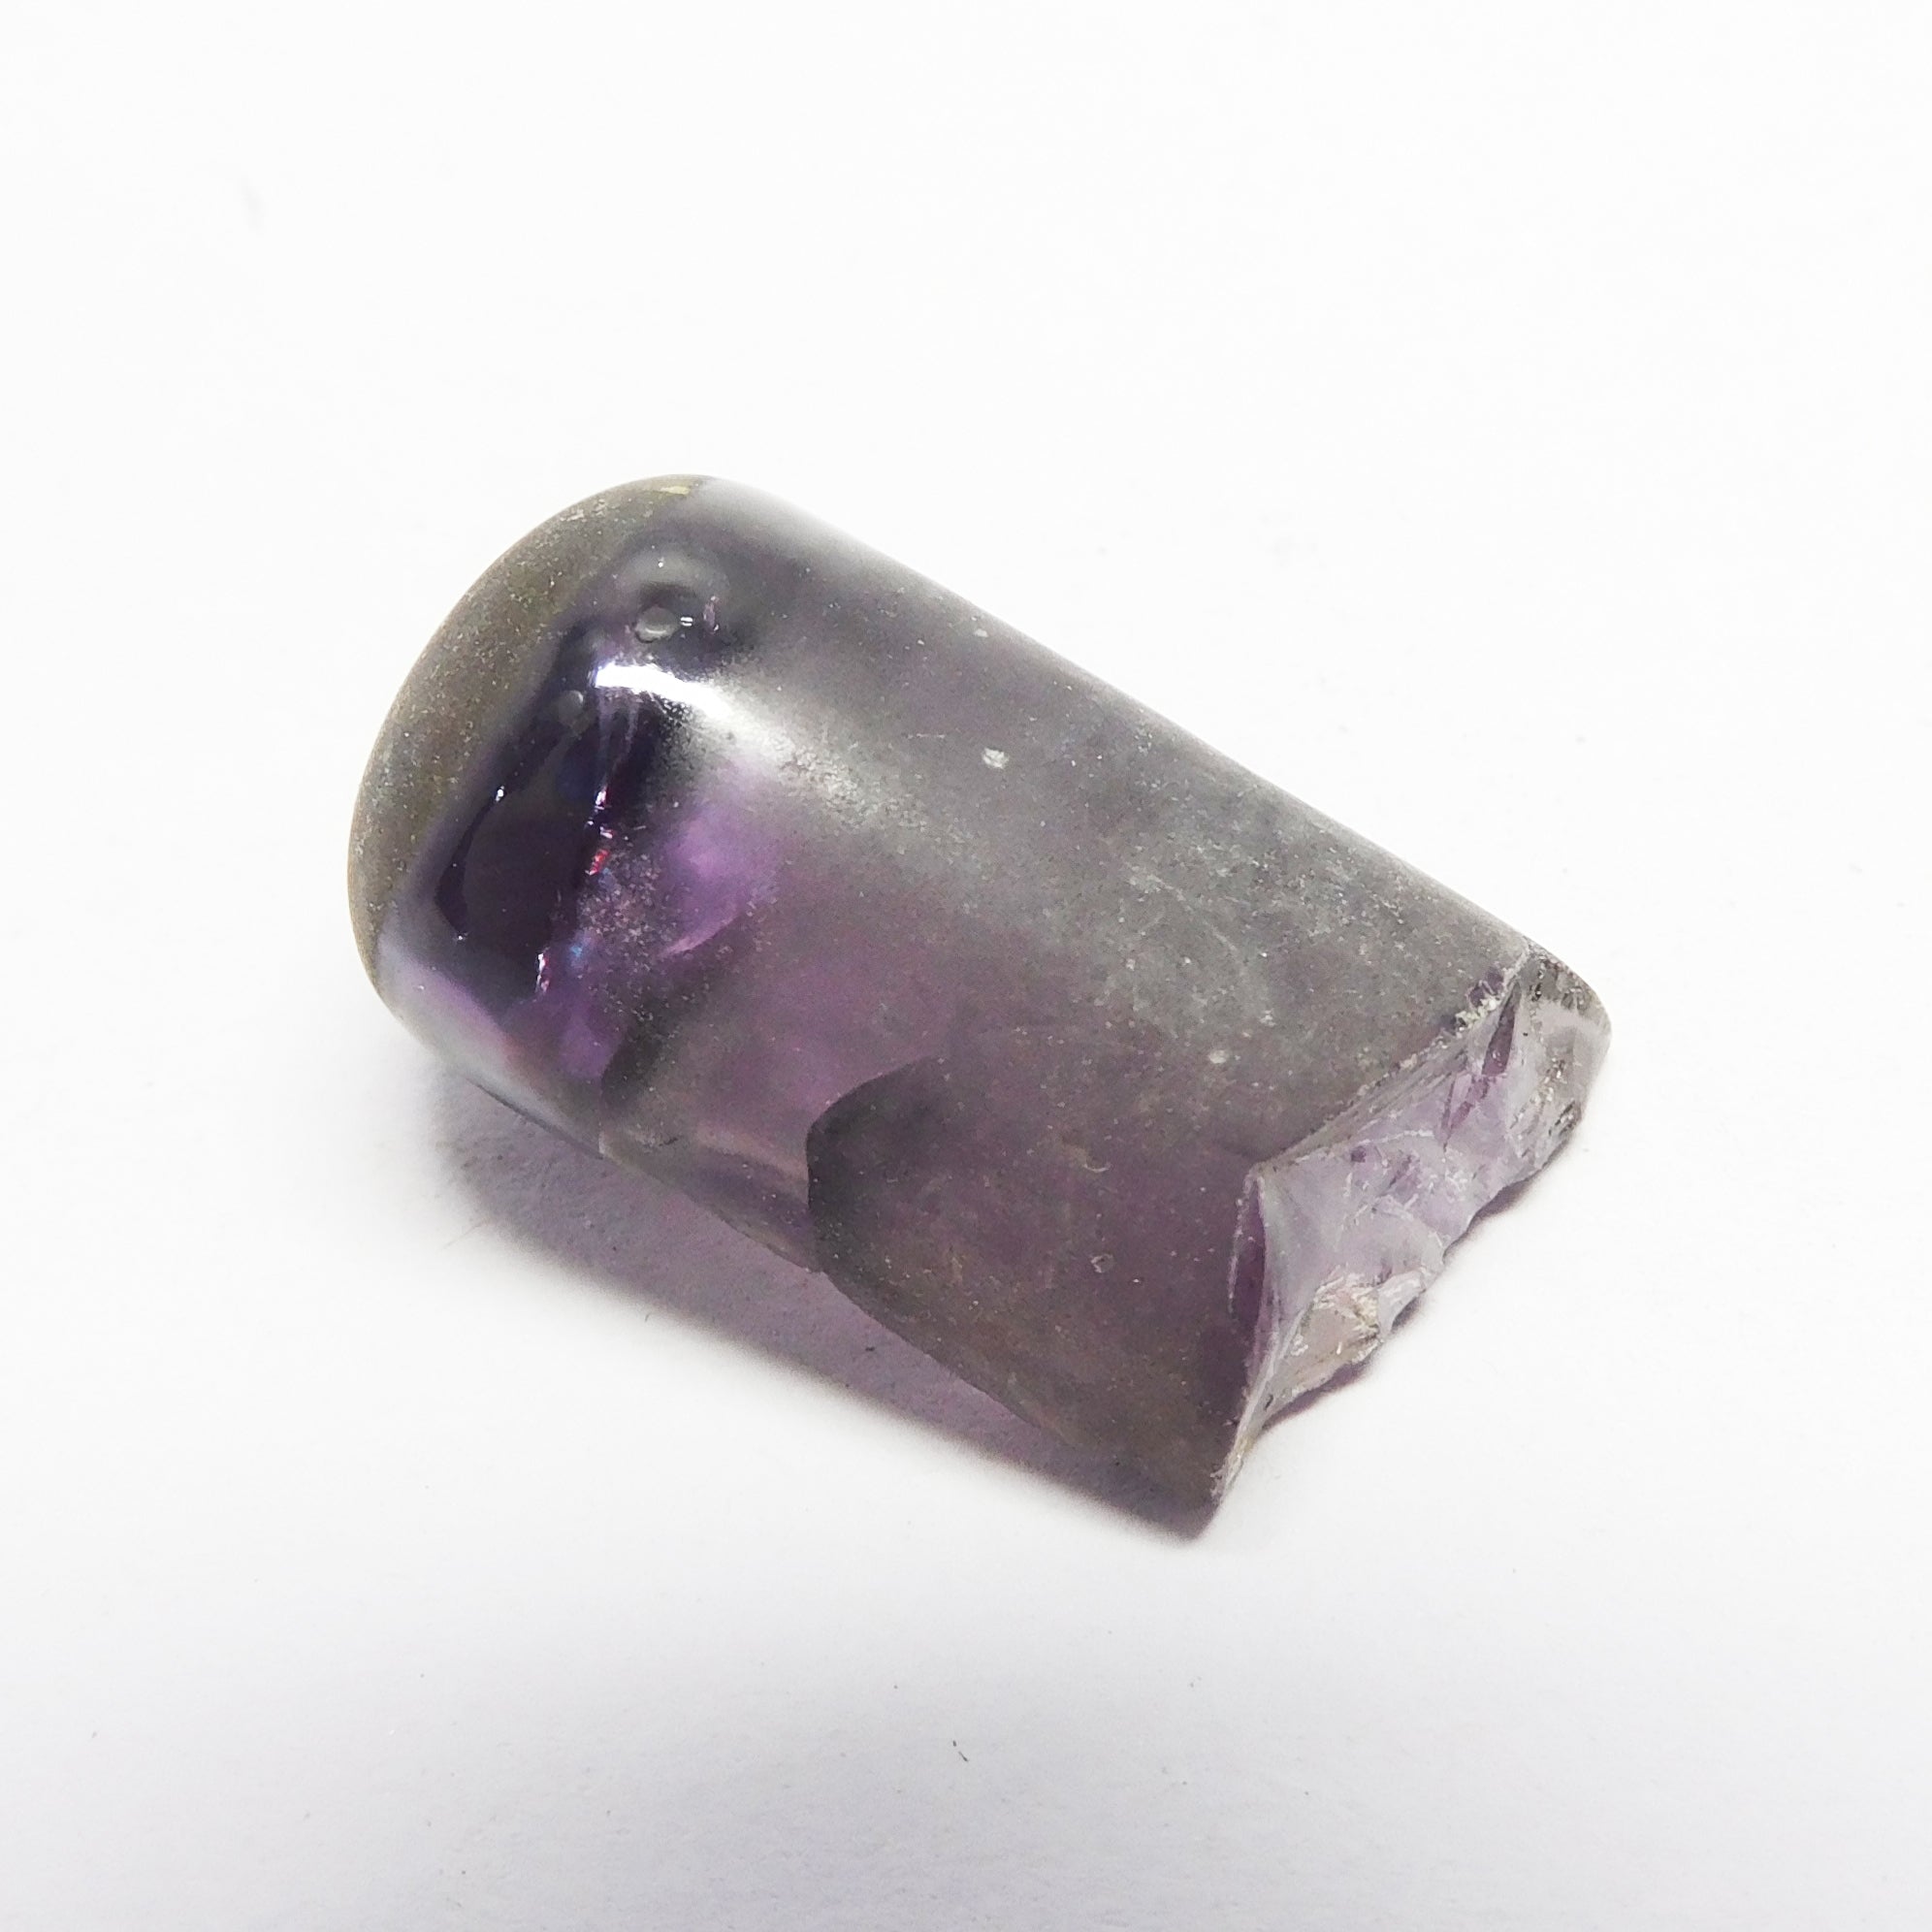 Best On Sale !! Free Shipping Free Gift !! Gift For Her/ Him , CERTIFIED Color Change Natural Uncut Alexandrite 33.95 Carat Loose Gemstone Raw Rough